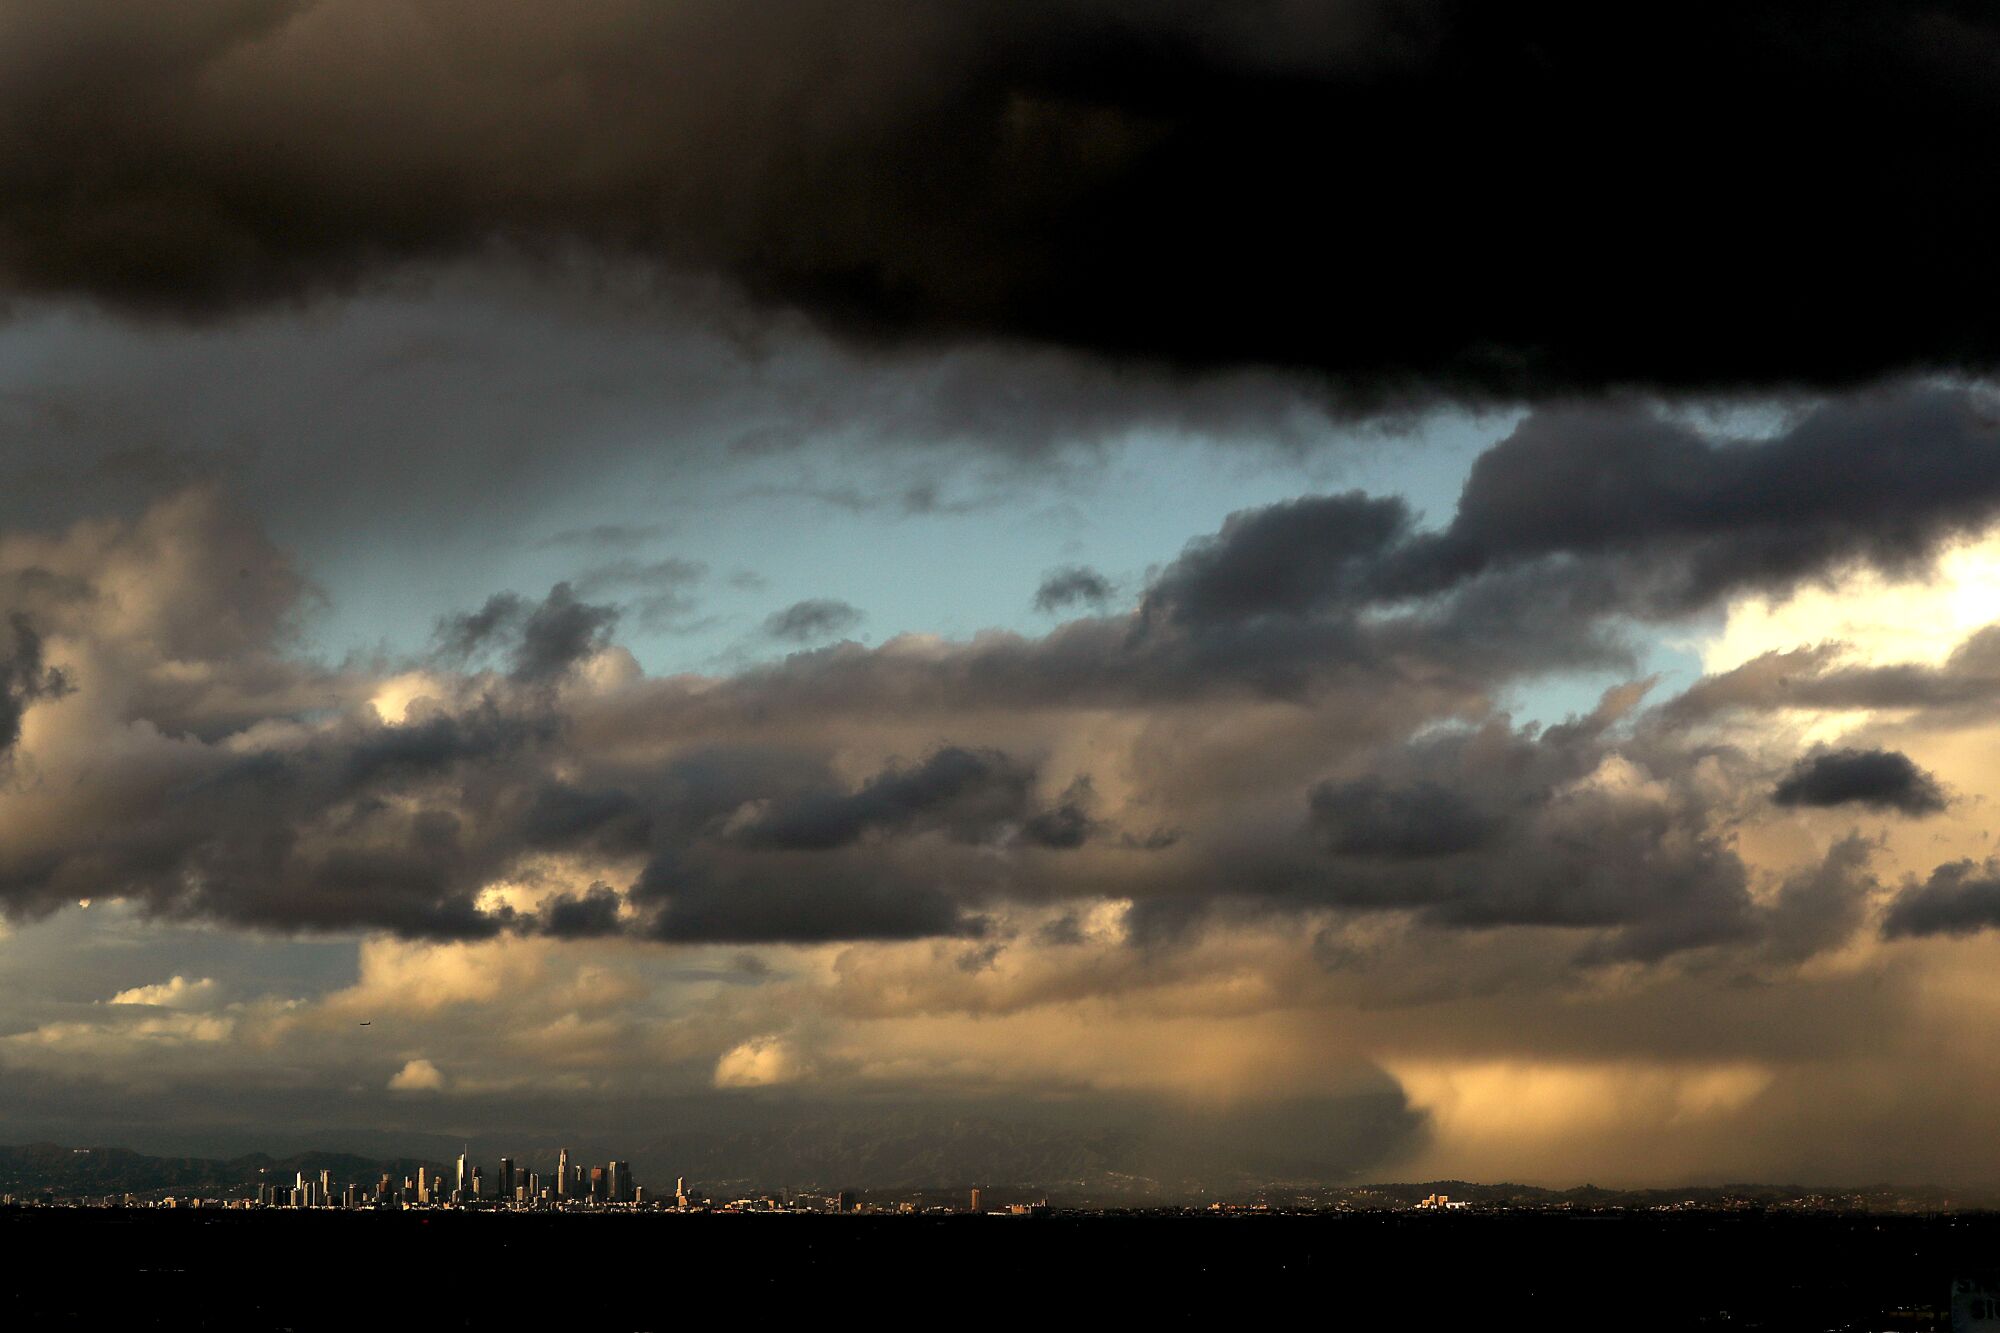 Dark and sunset-lit clouds cover the sky in alternating rows, with the Los Angeles skyline visible at the bottom in distance.